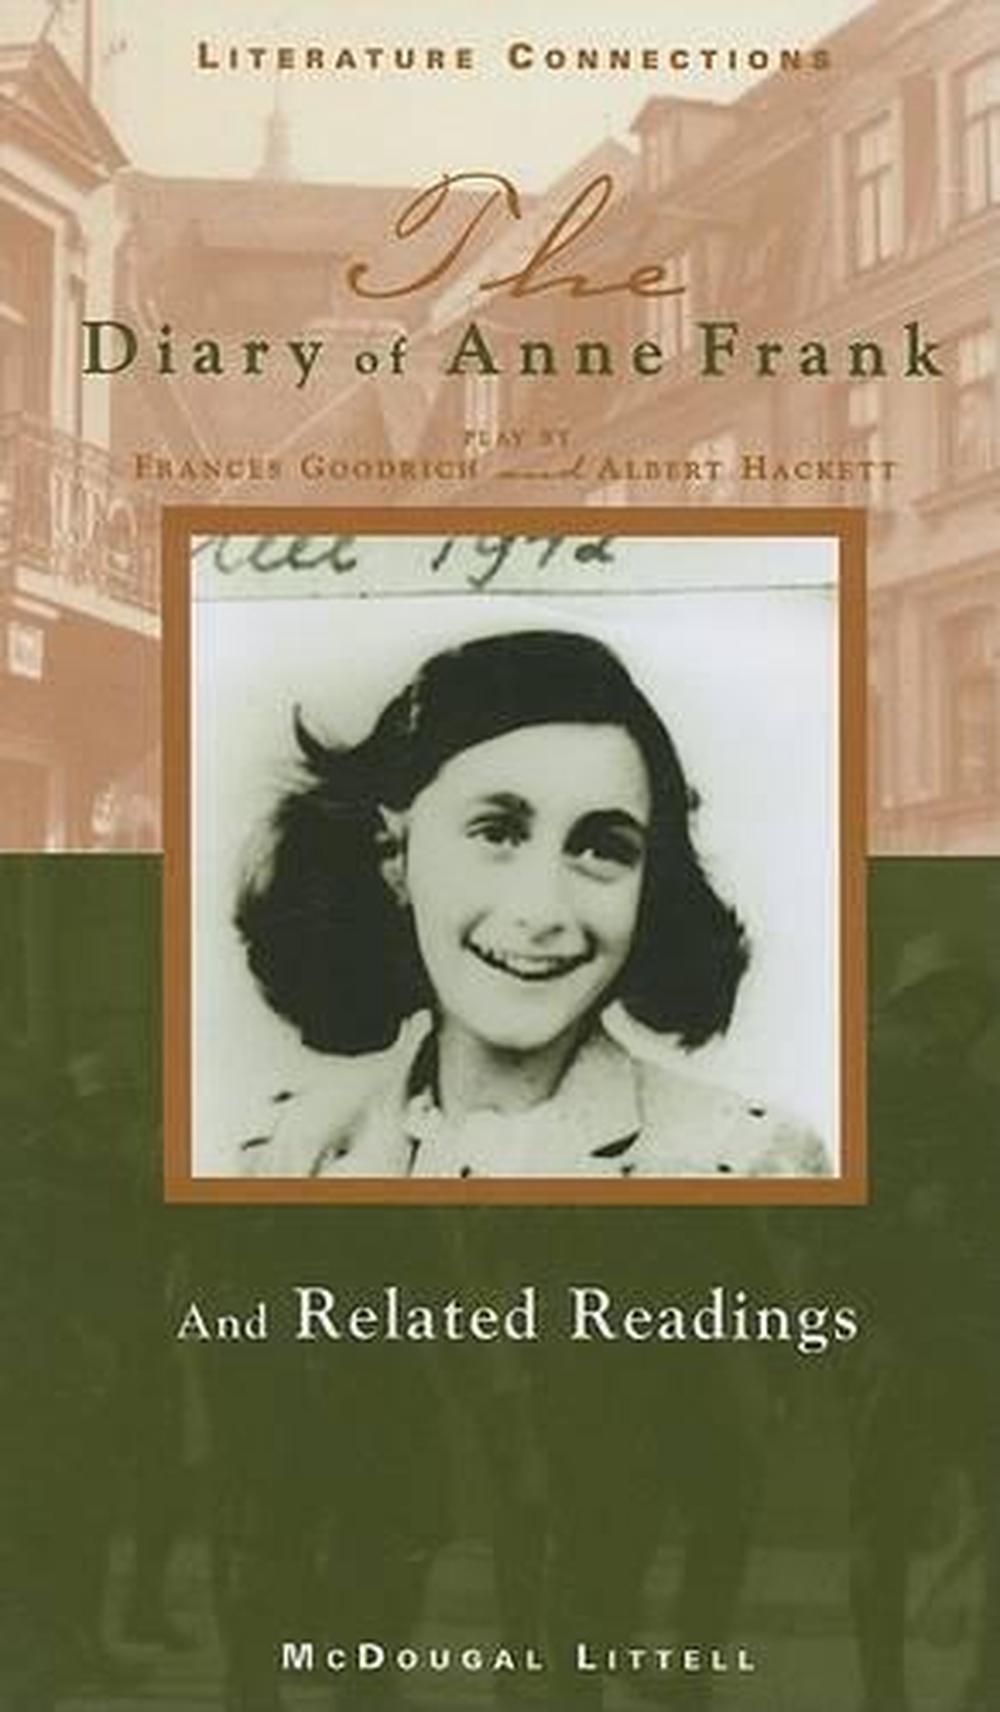 book review on the diary of anne frank